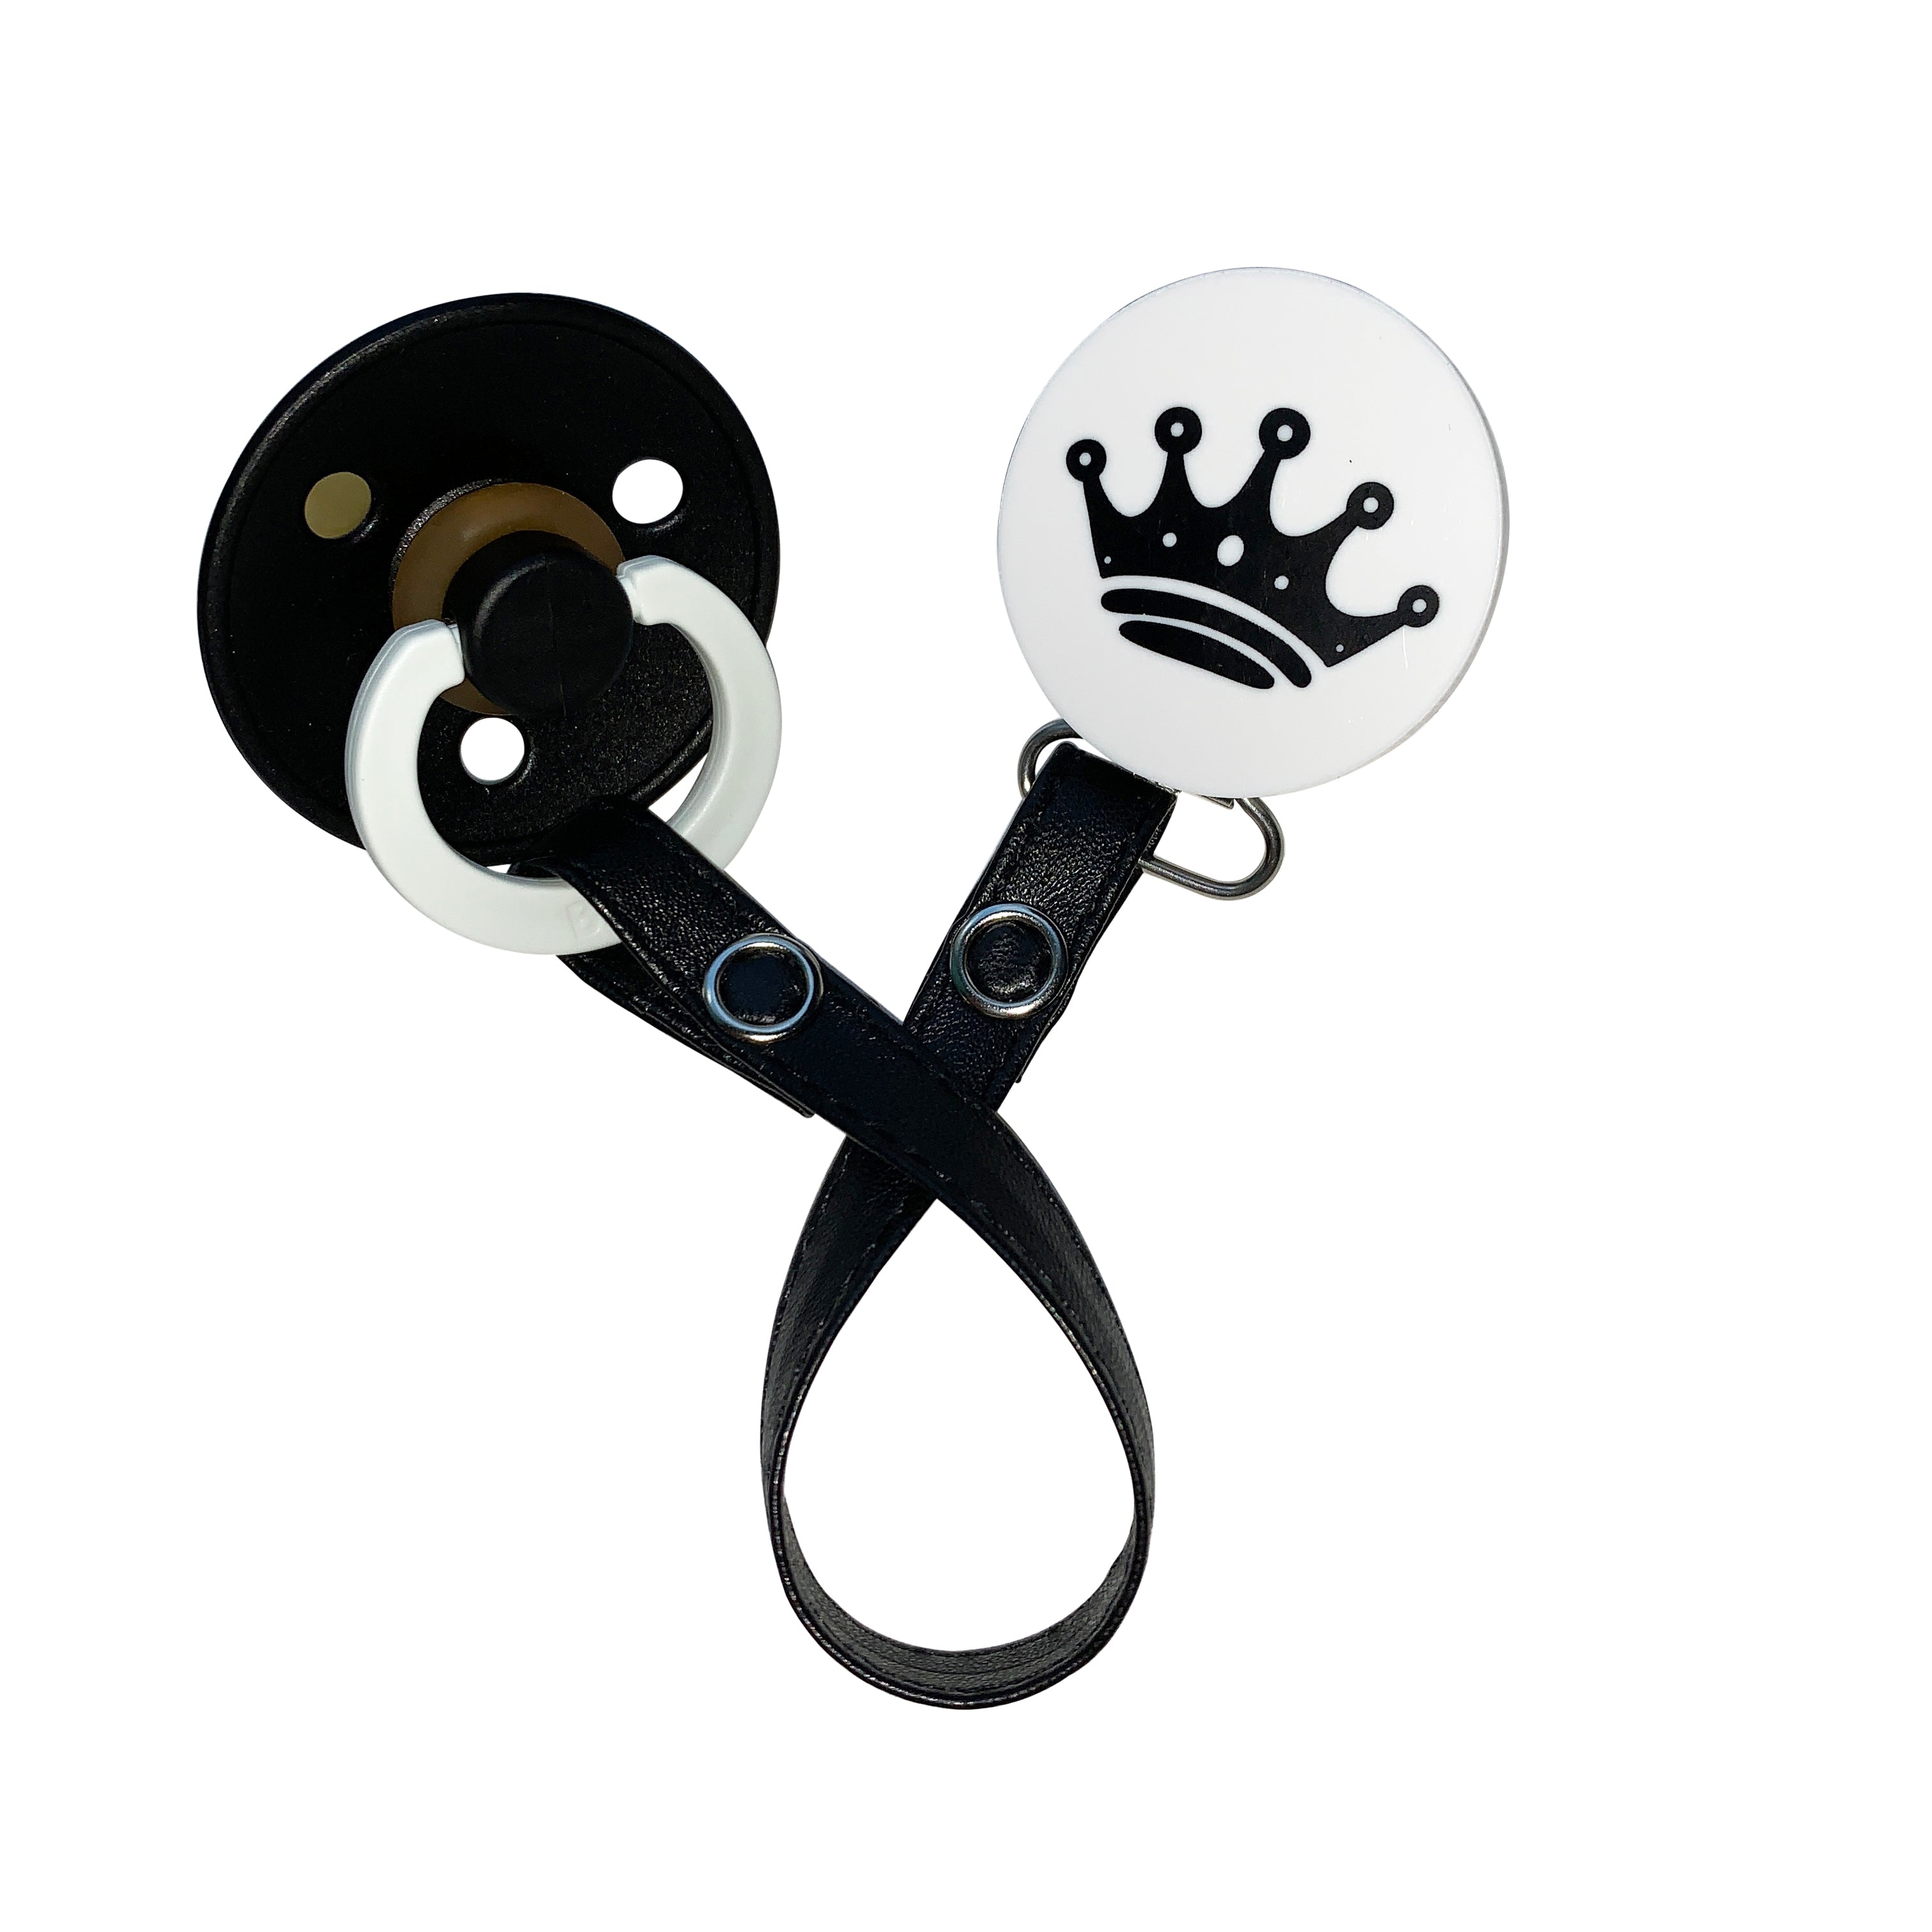 Classy Paci White with Black crown circle clip with a Bibs pacifier GIFT SET